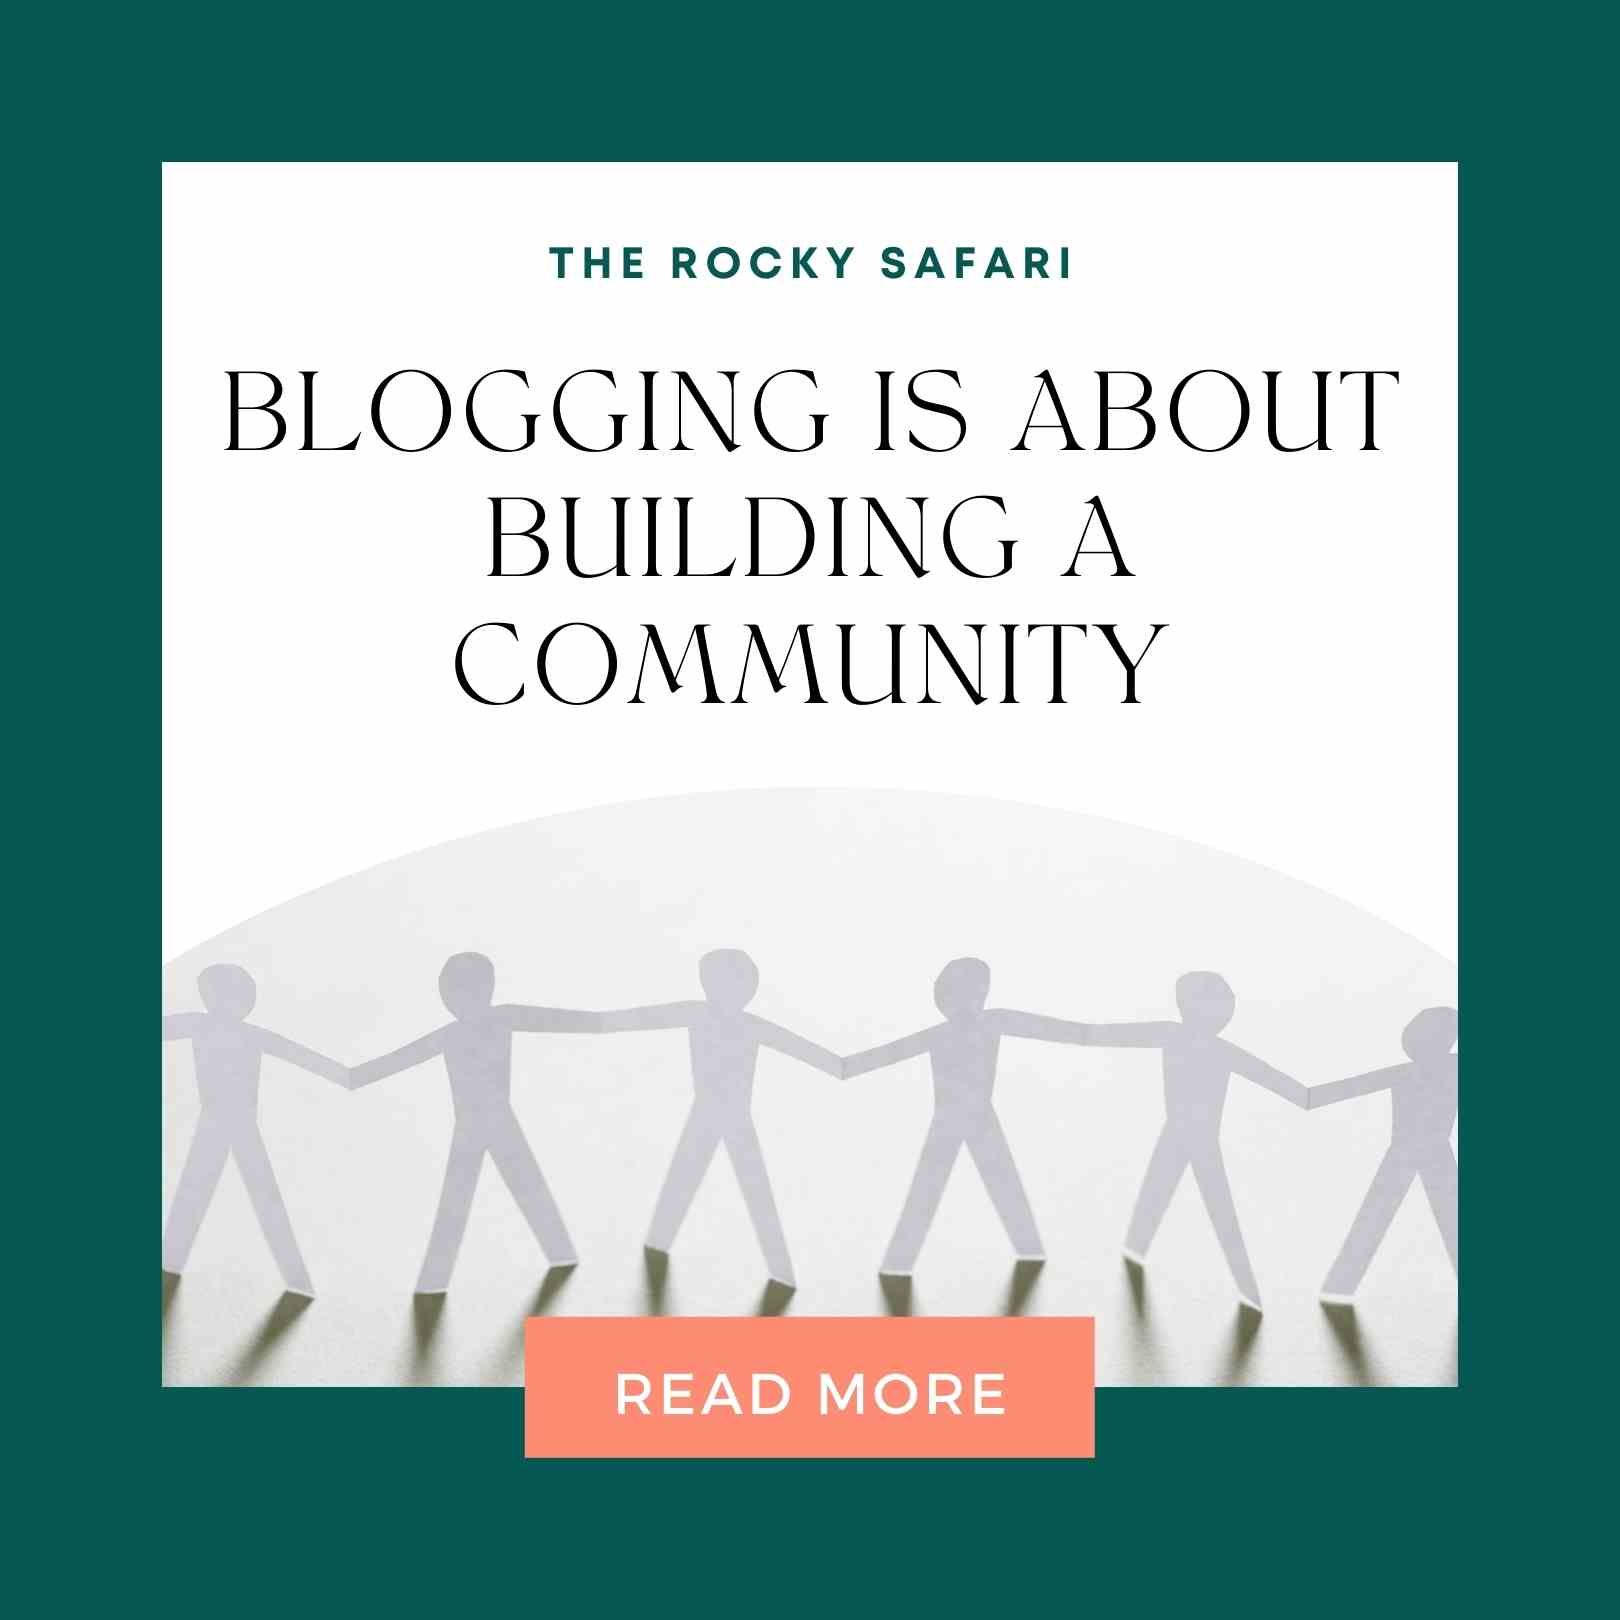 blogging is about BUILDING A community